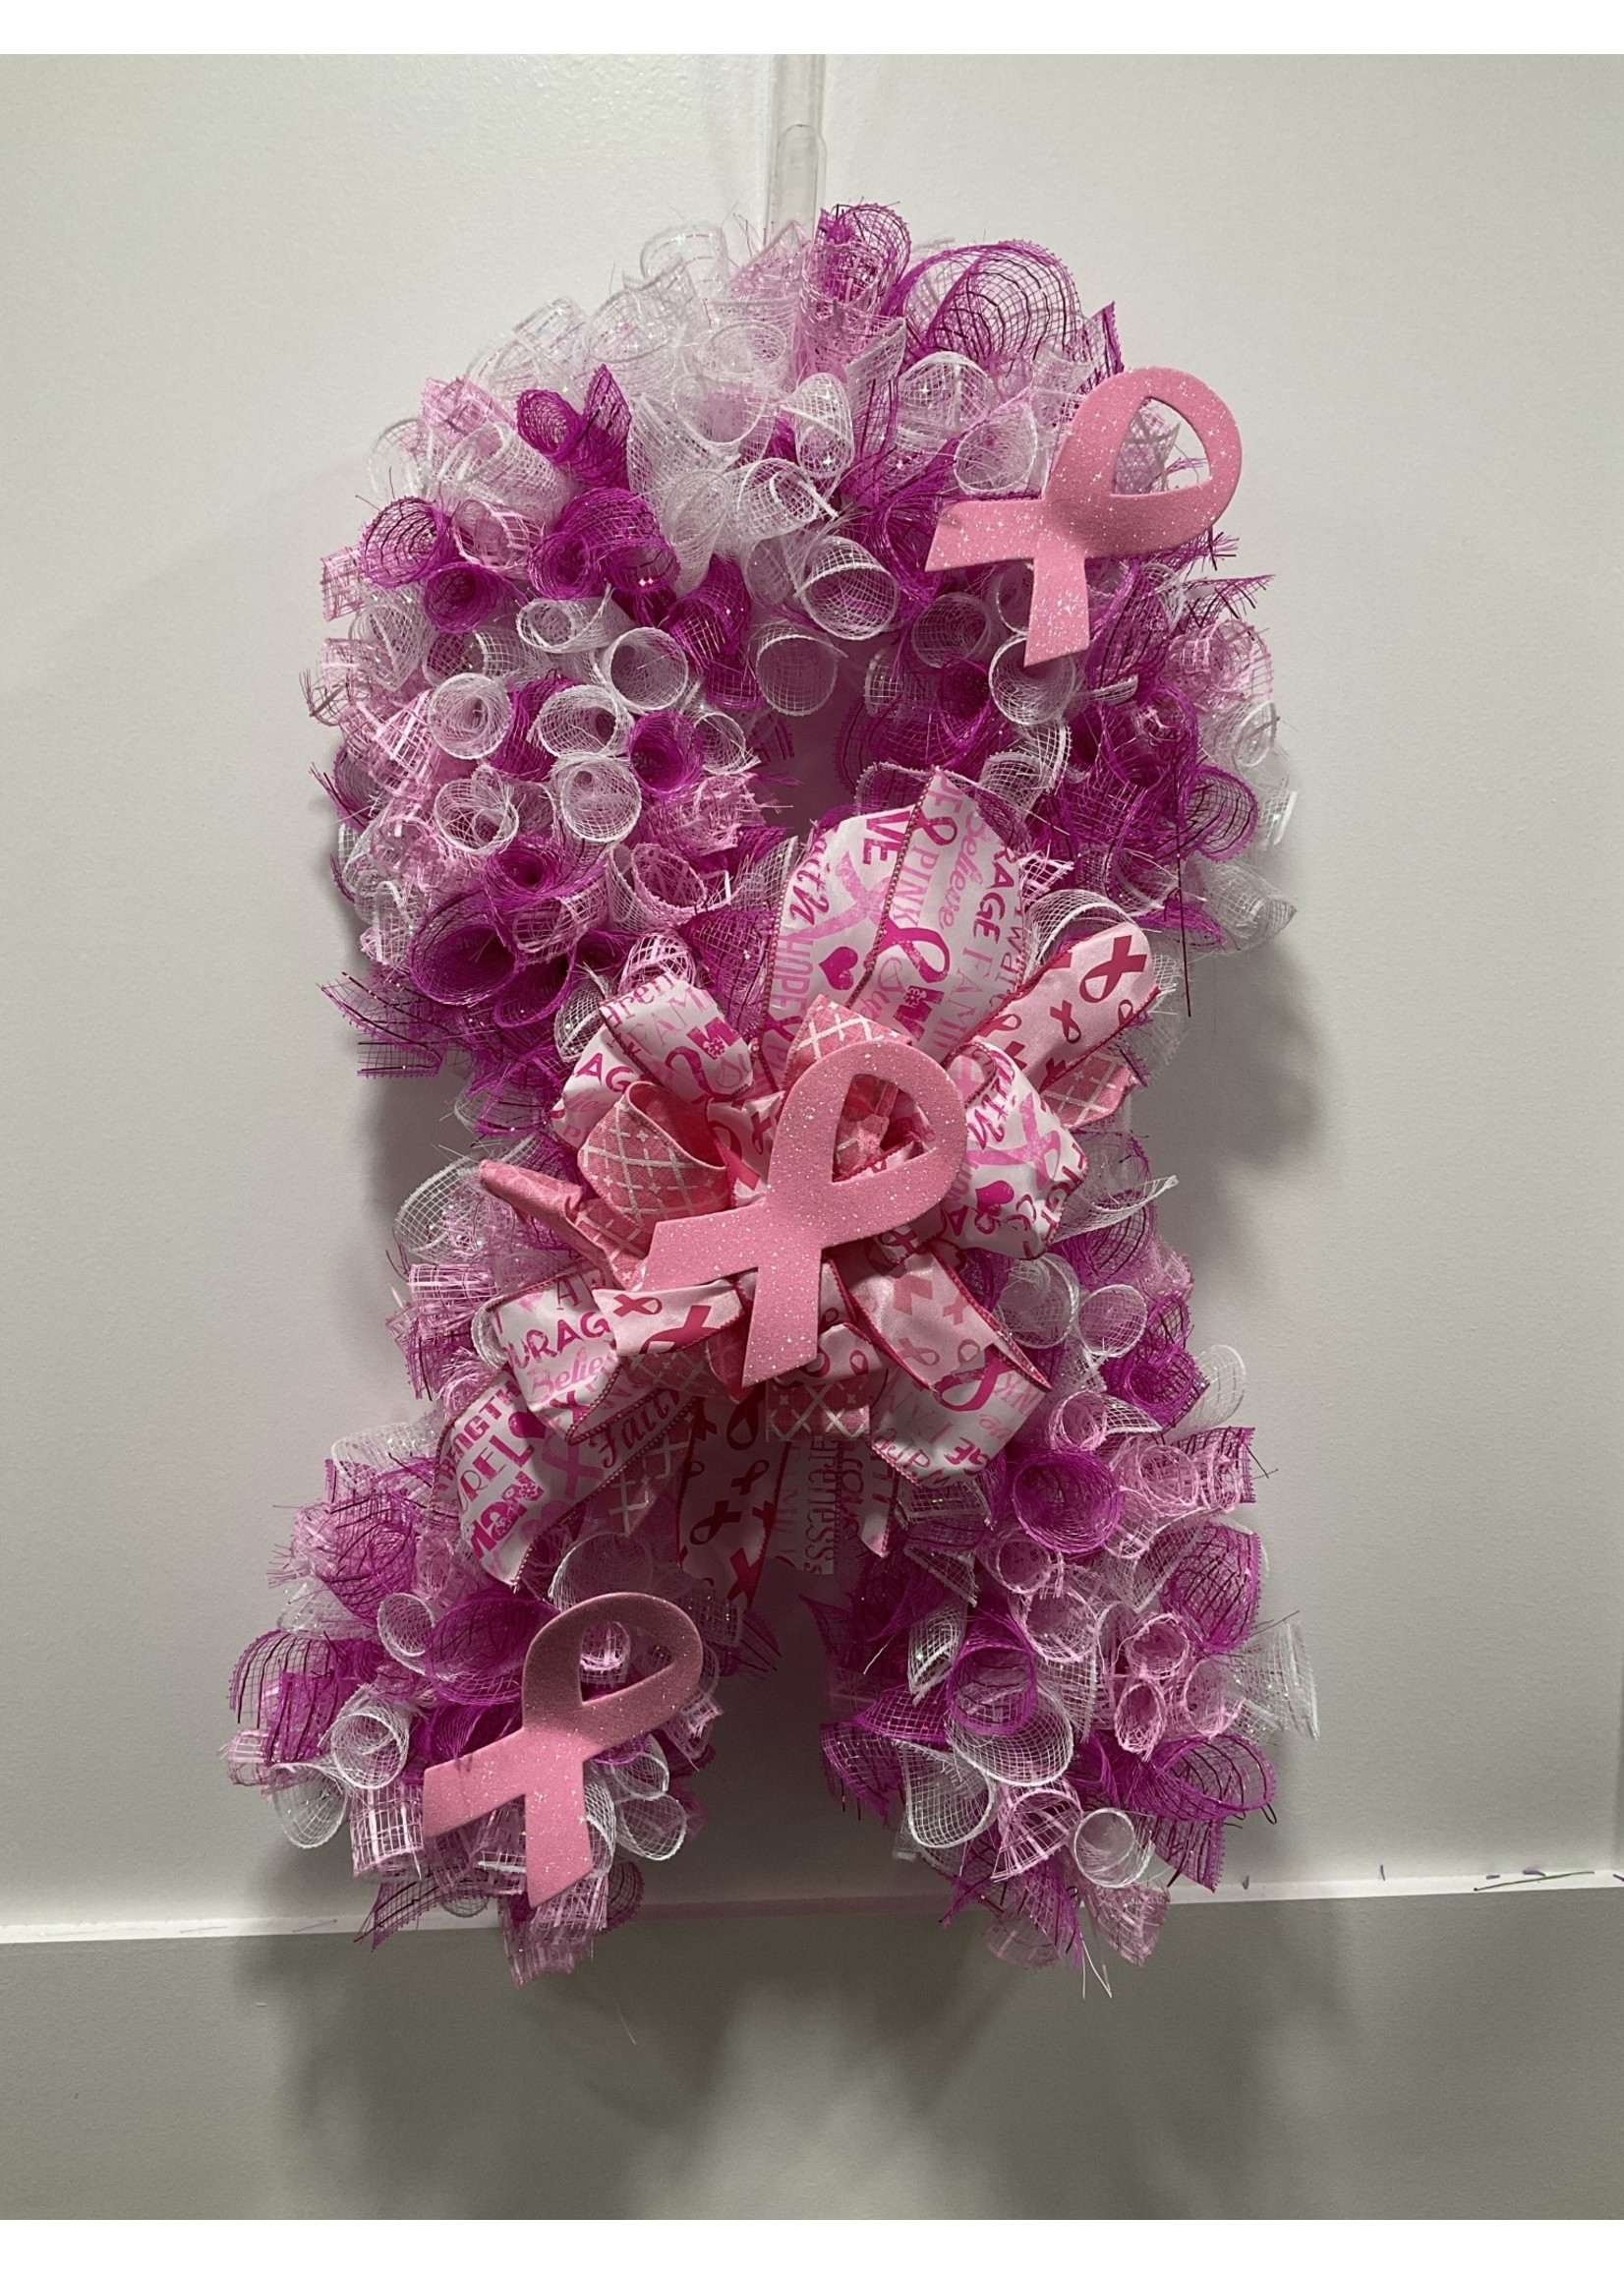 My New Favorite Thing Wreath Mesh Support 23 in-Pink and White w/Support and Pink Support Ribbon